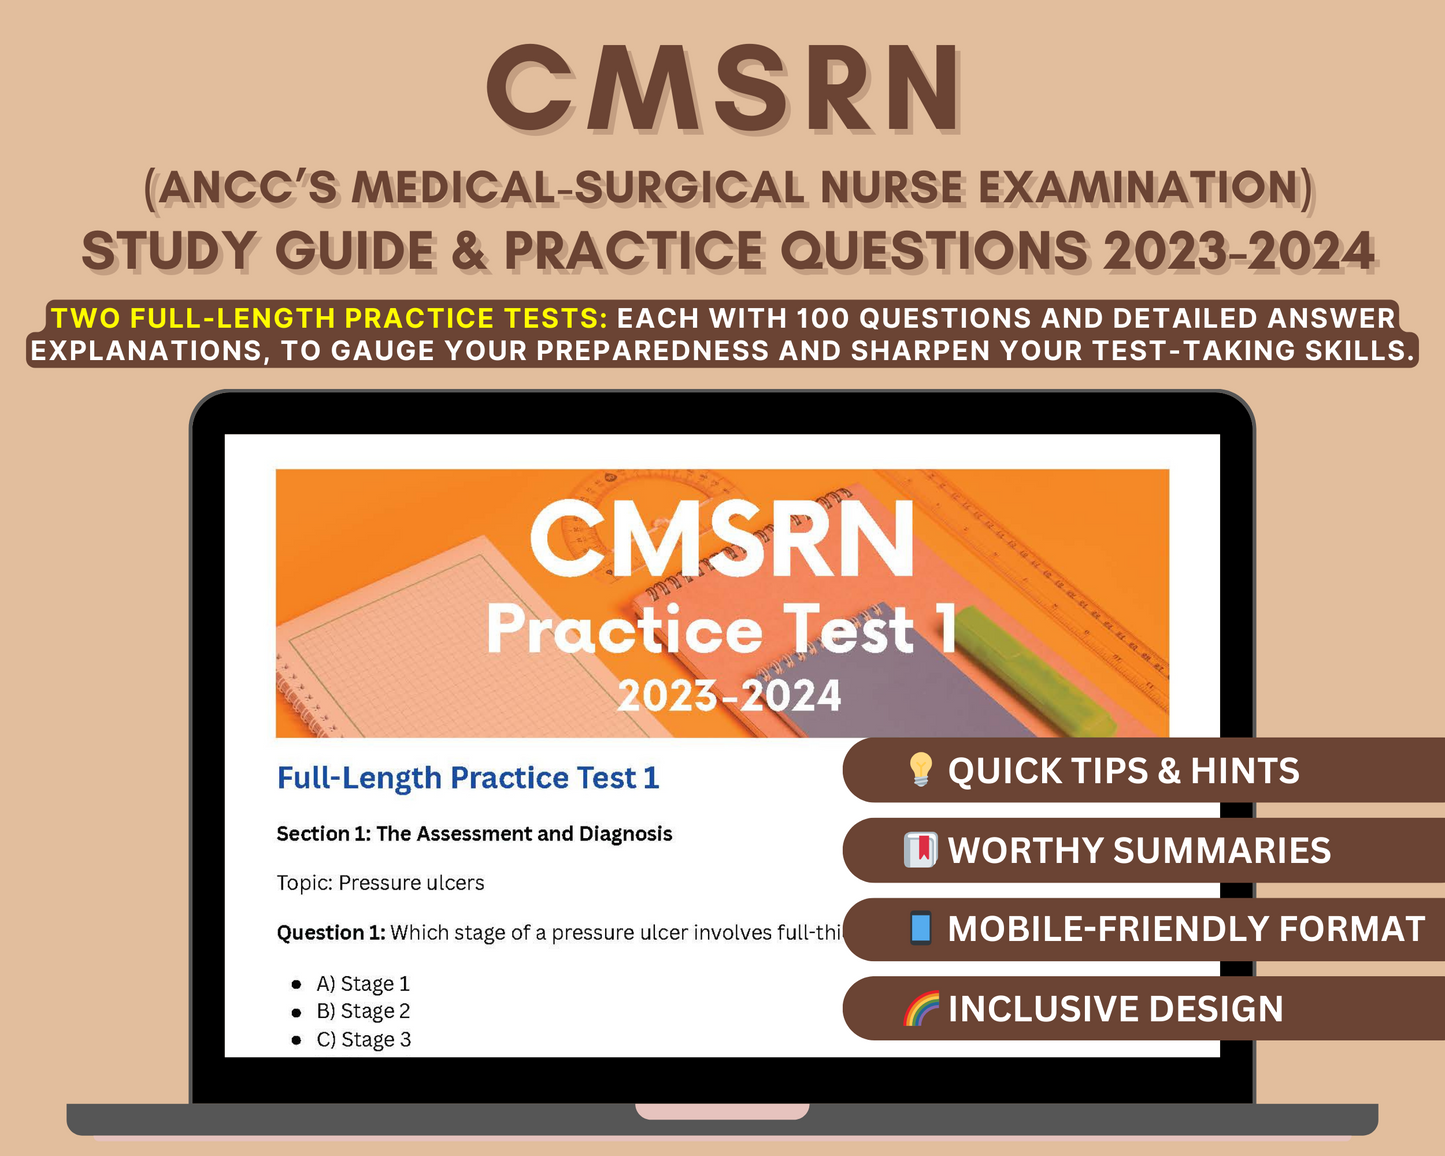 CMSRN Study Guide 2023-2024: In-Depth Content Review, Practice Tests & Exam Tips for Medical-Surgical Nurse Exam Prep